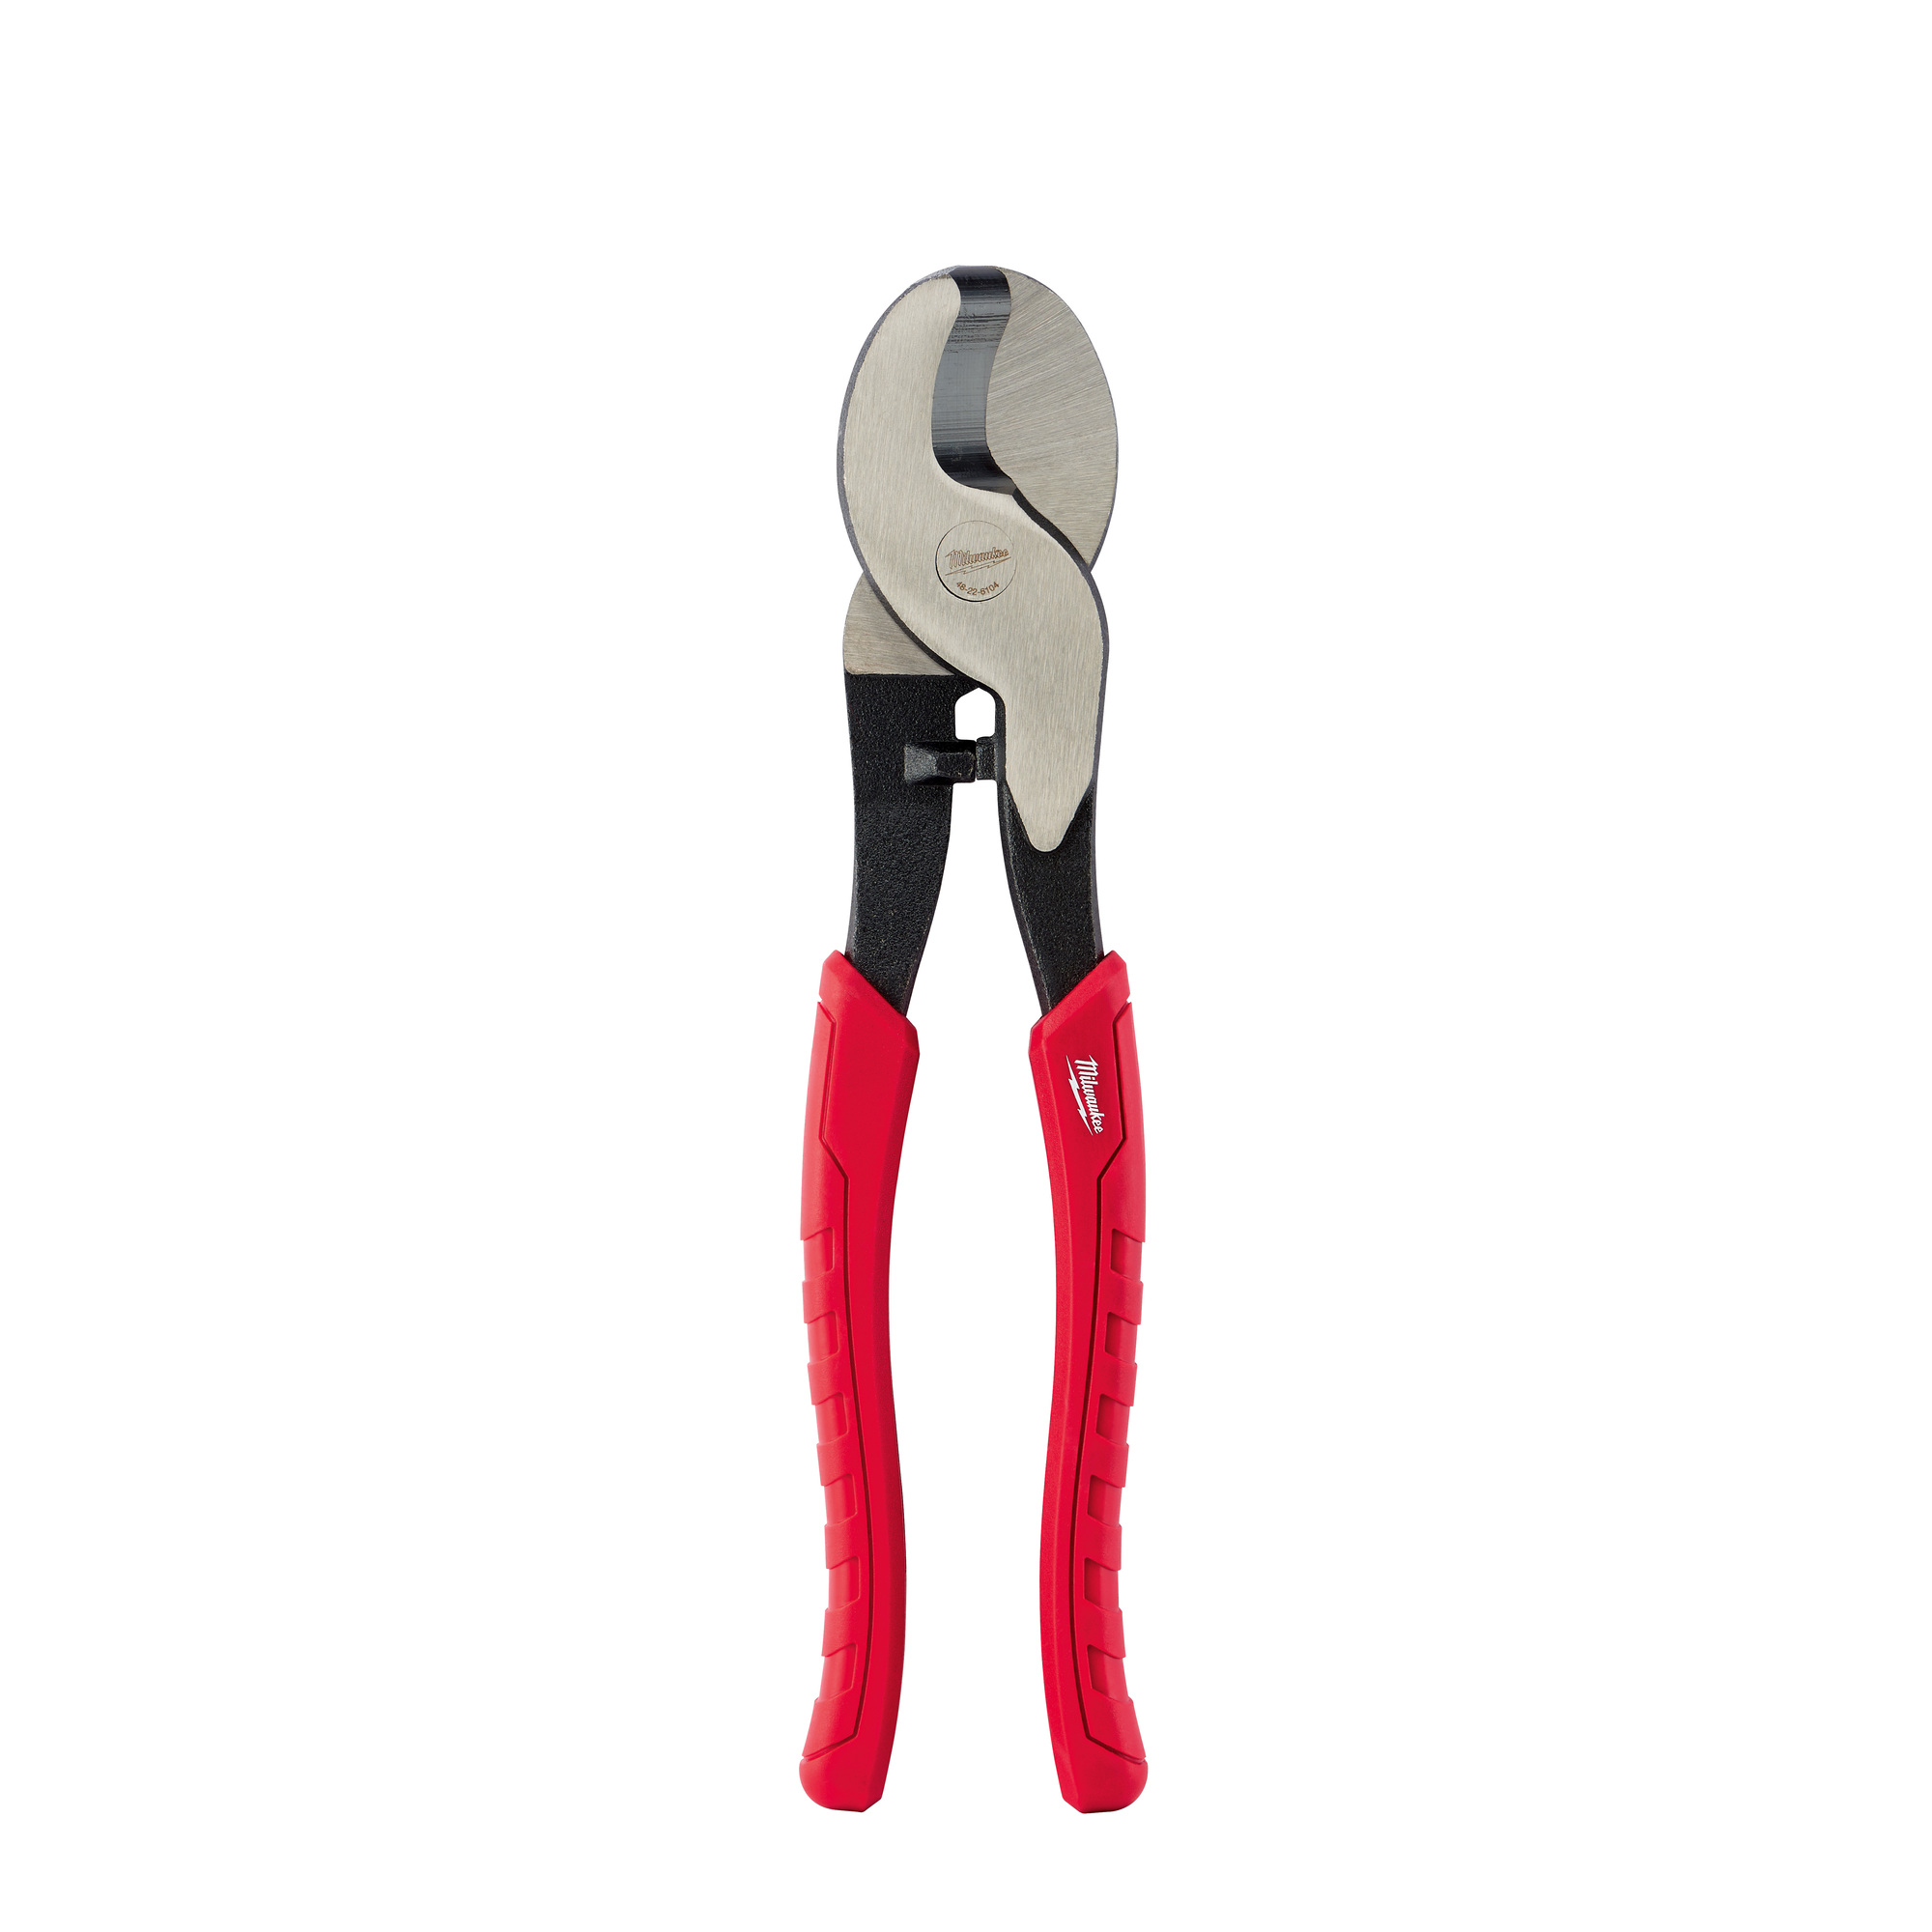 Milwaukee, Comfort Grip Cable Cutting Pliers, Pieces (qty.) 1, Material Metal, Jaw Capacity 2 in, Model 48-22-6104